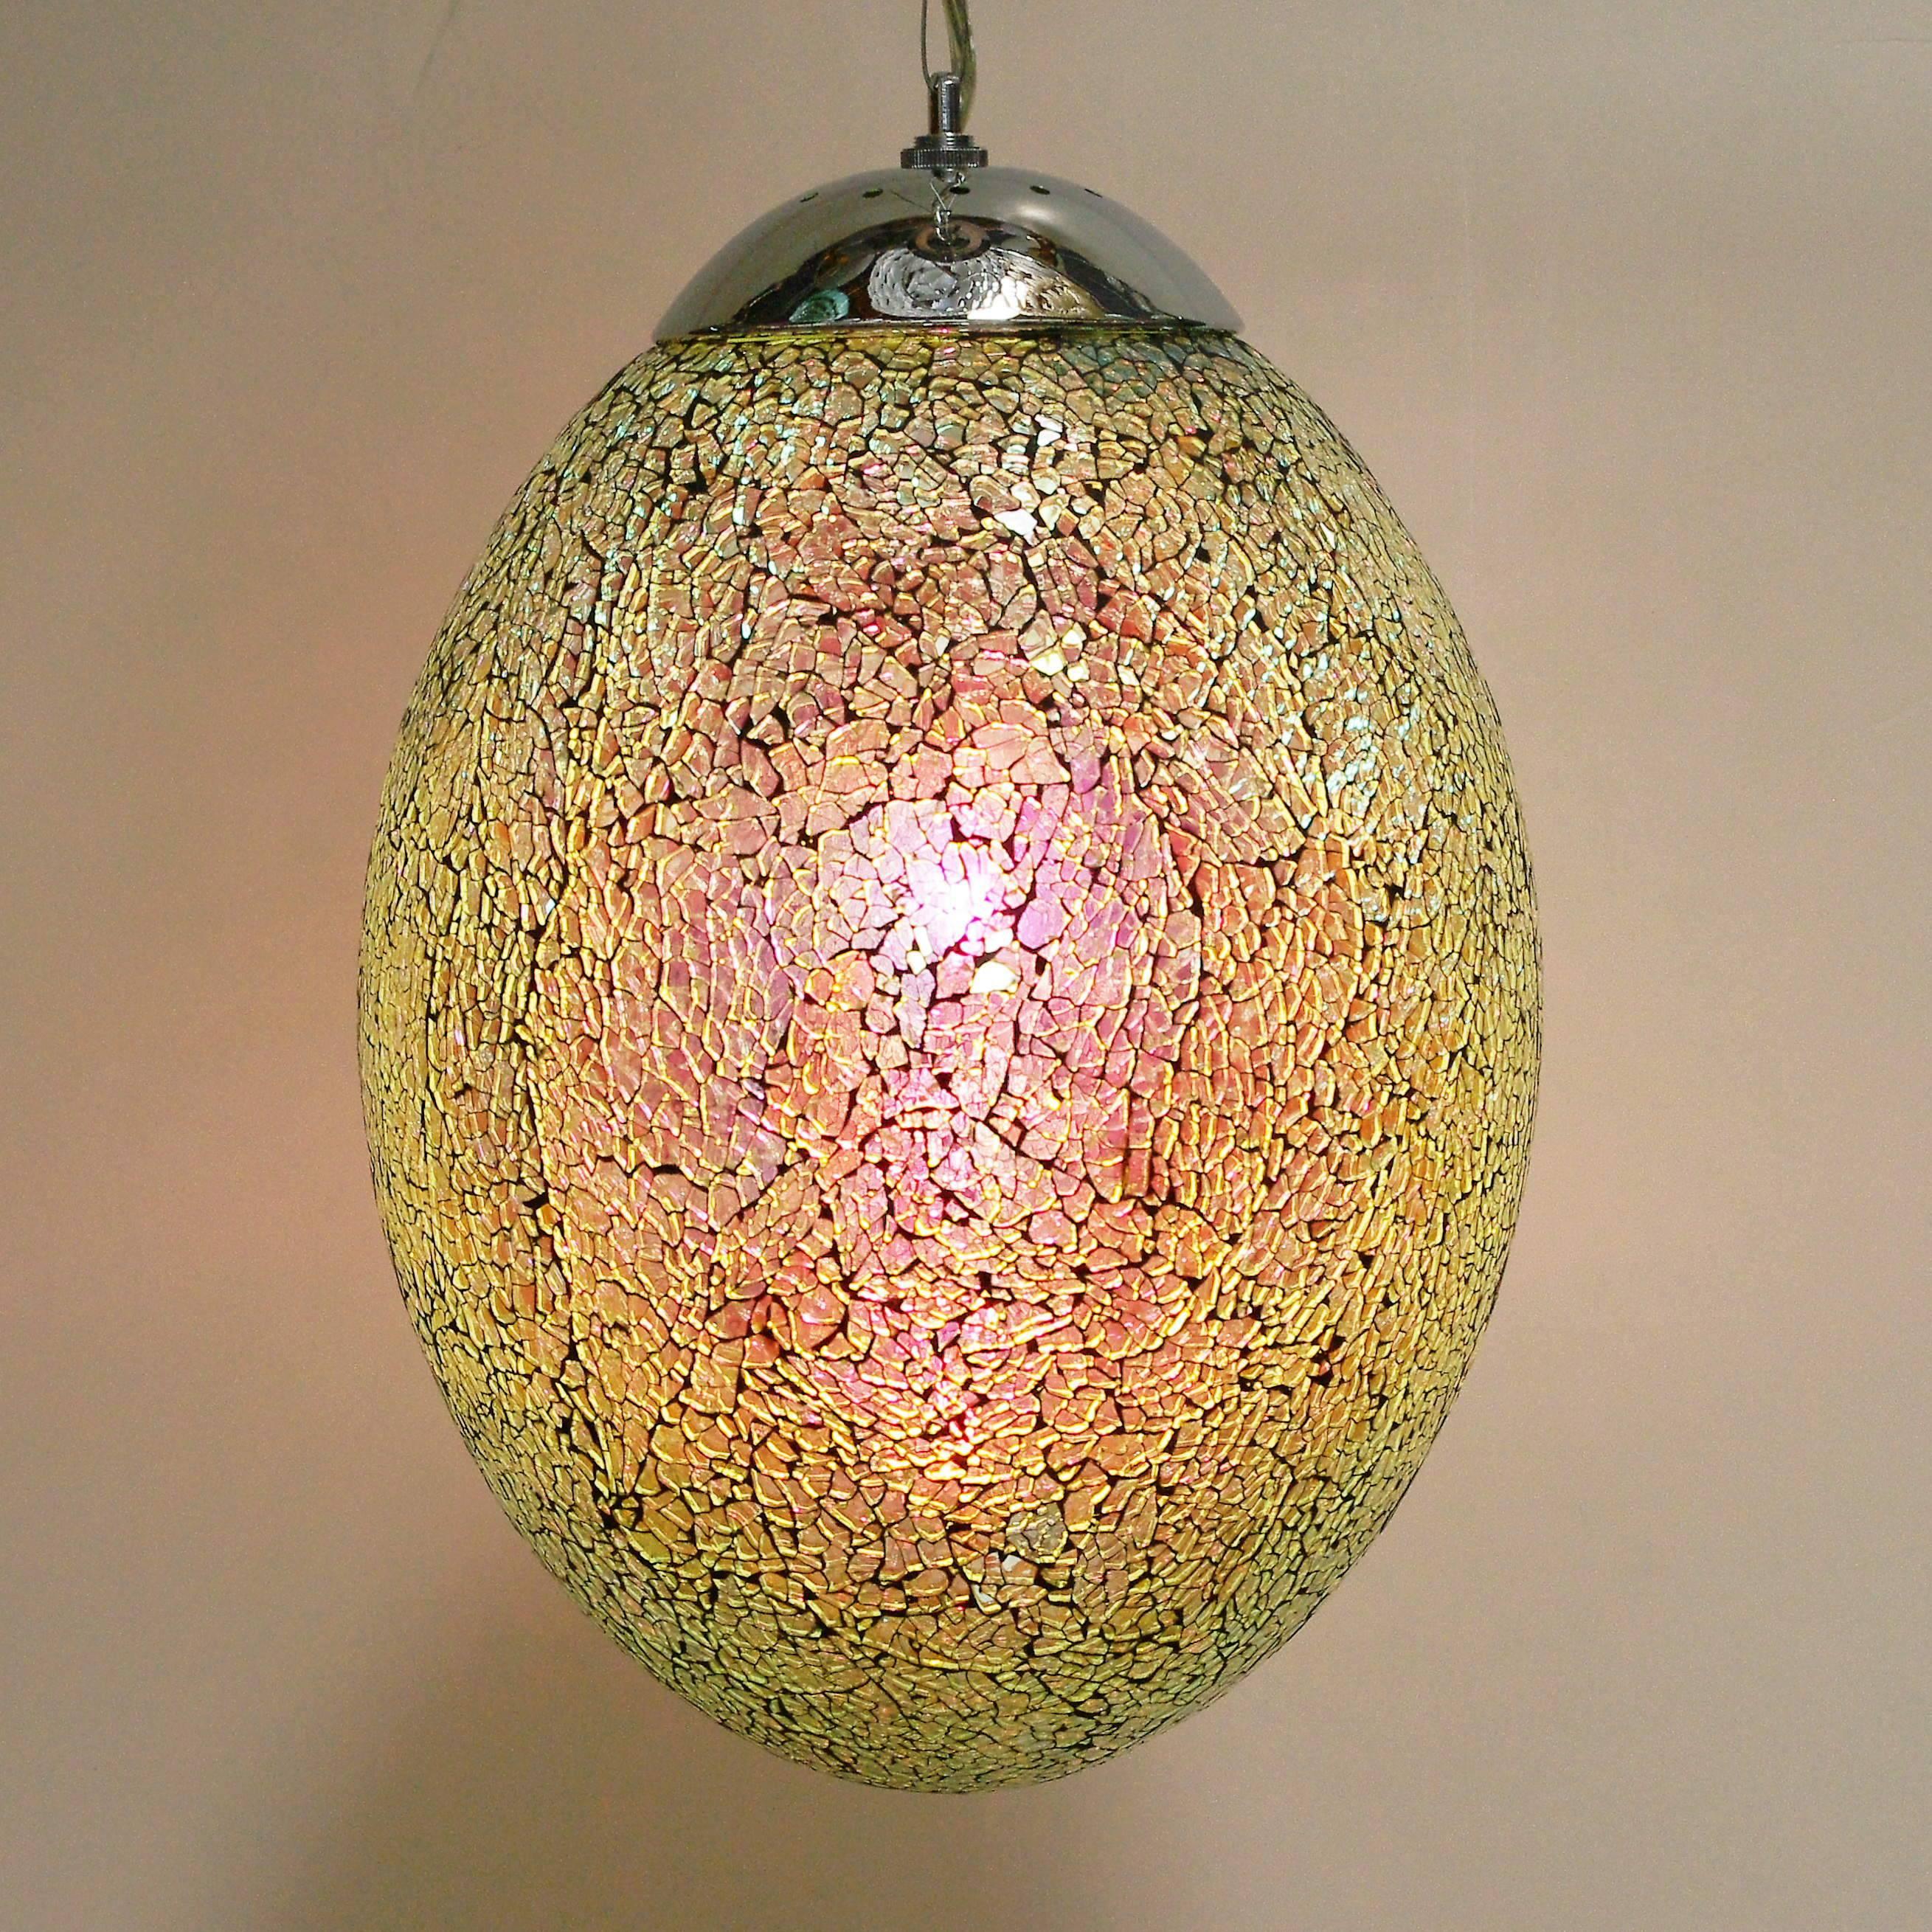 Crackled iridescent glass egg shaped pendants with chrome hardware / Designed by Fabio Bergomi for Fabio Ltd
1 light / E26 or E27 type / max 60W each
Diameter: 11 inches / Height: 17 inches plus chain and canopy
6 in stock in Palm Springs ON FINAL